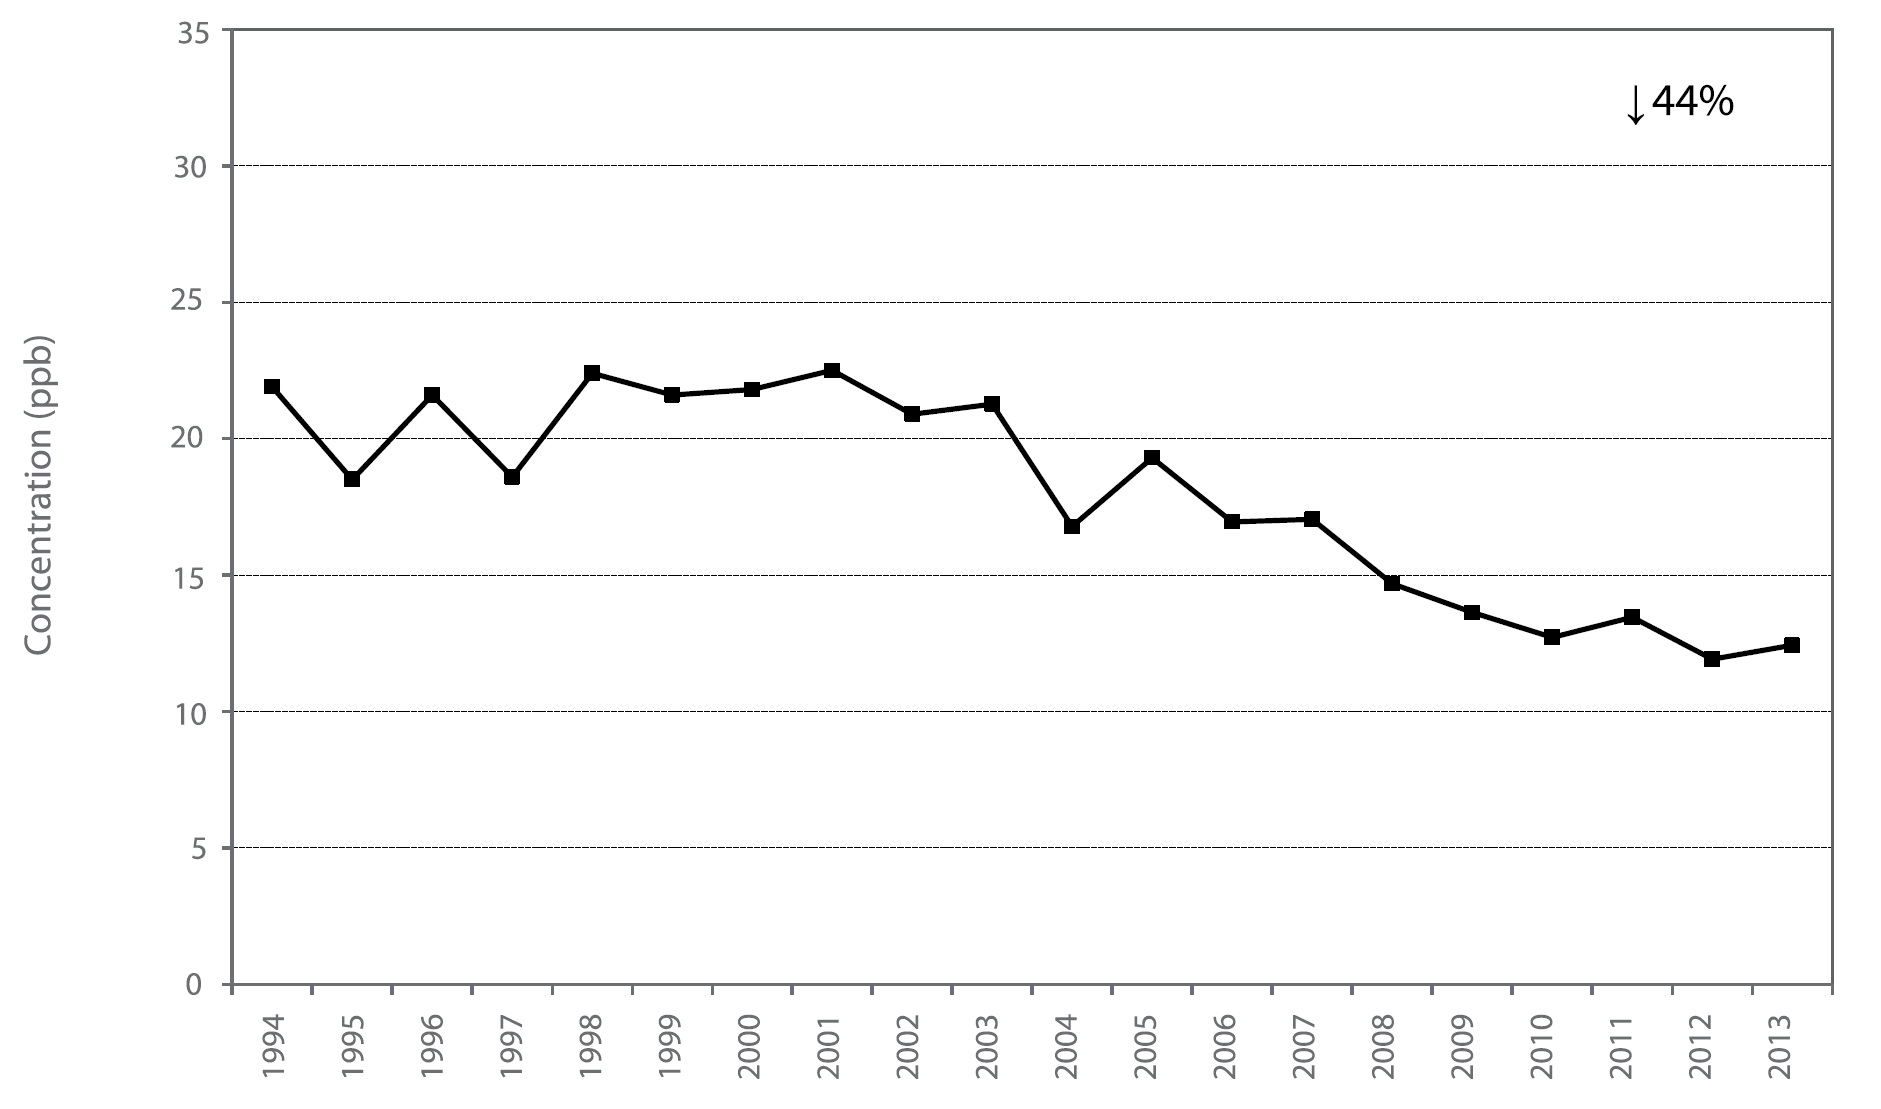 Figure A32 is a line chart displaying the nitrogen dioxide annual mean at Hamilton Downtown from 1994 to 2013. Over this 20-year period, nitrogen dioxide decreased 44%.